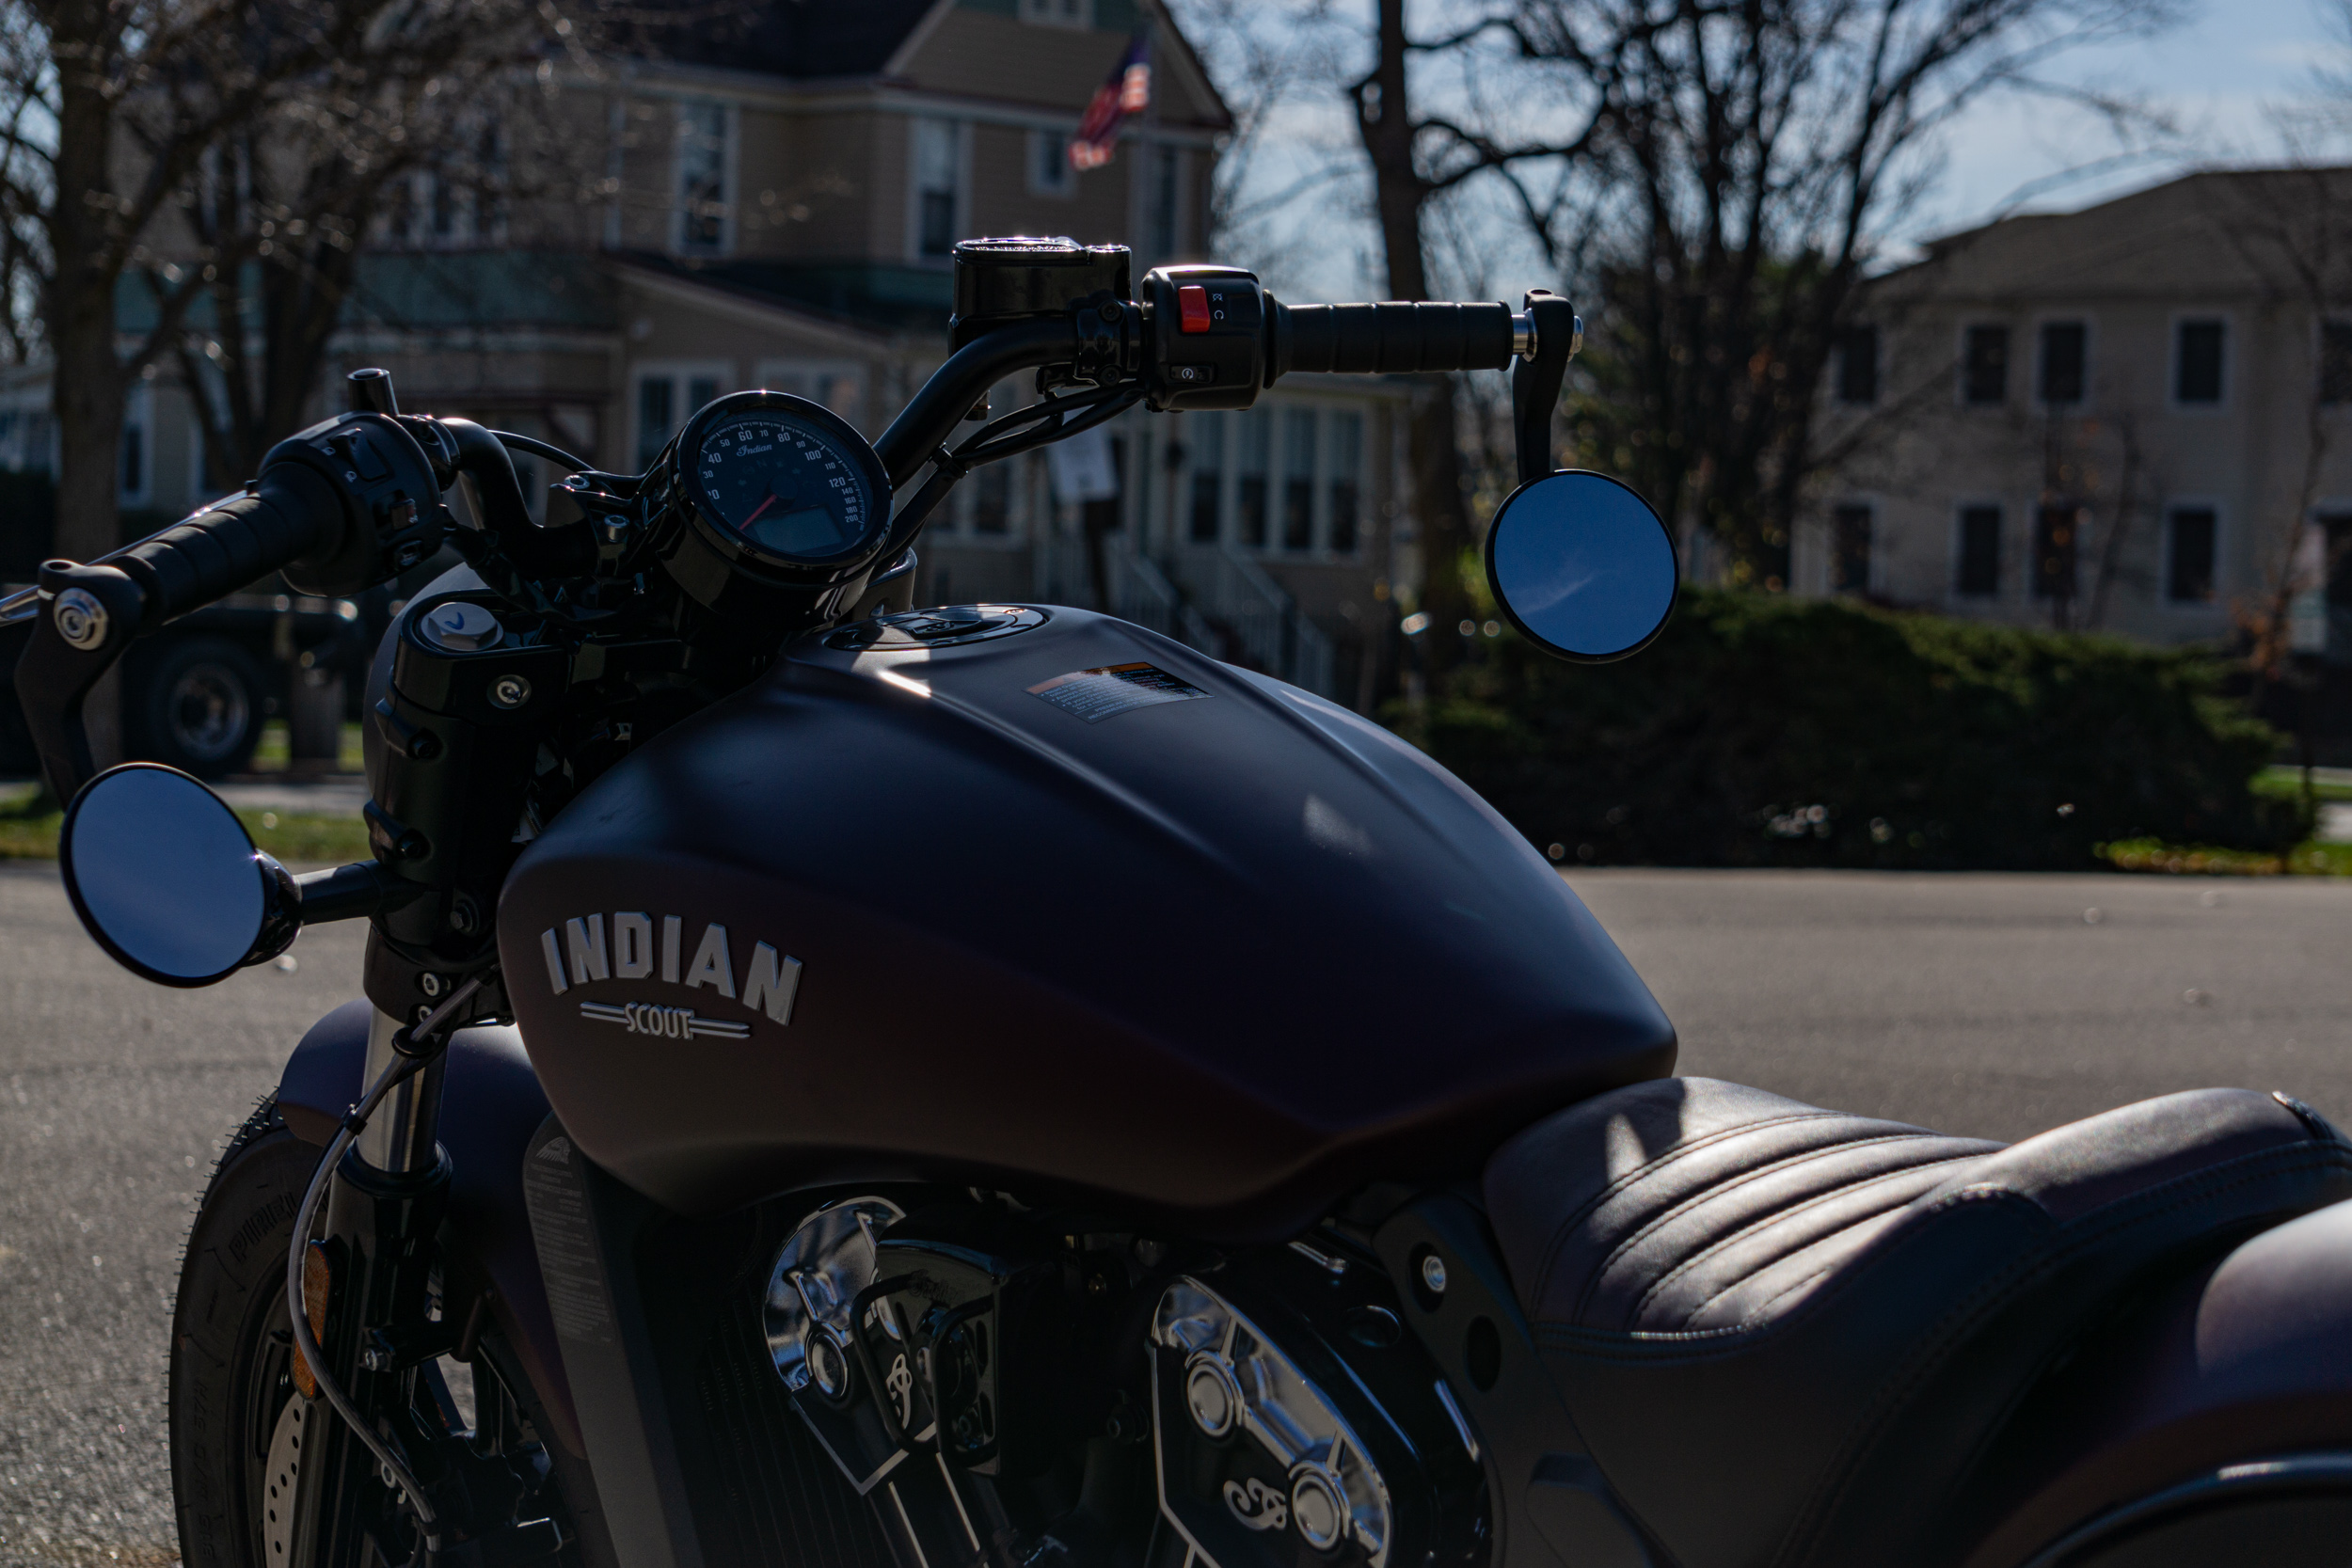 The rear 3/4 view of a 2021 Indian Scout Bobber motorcycle's handlebars and gauge